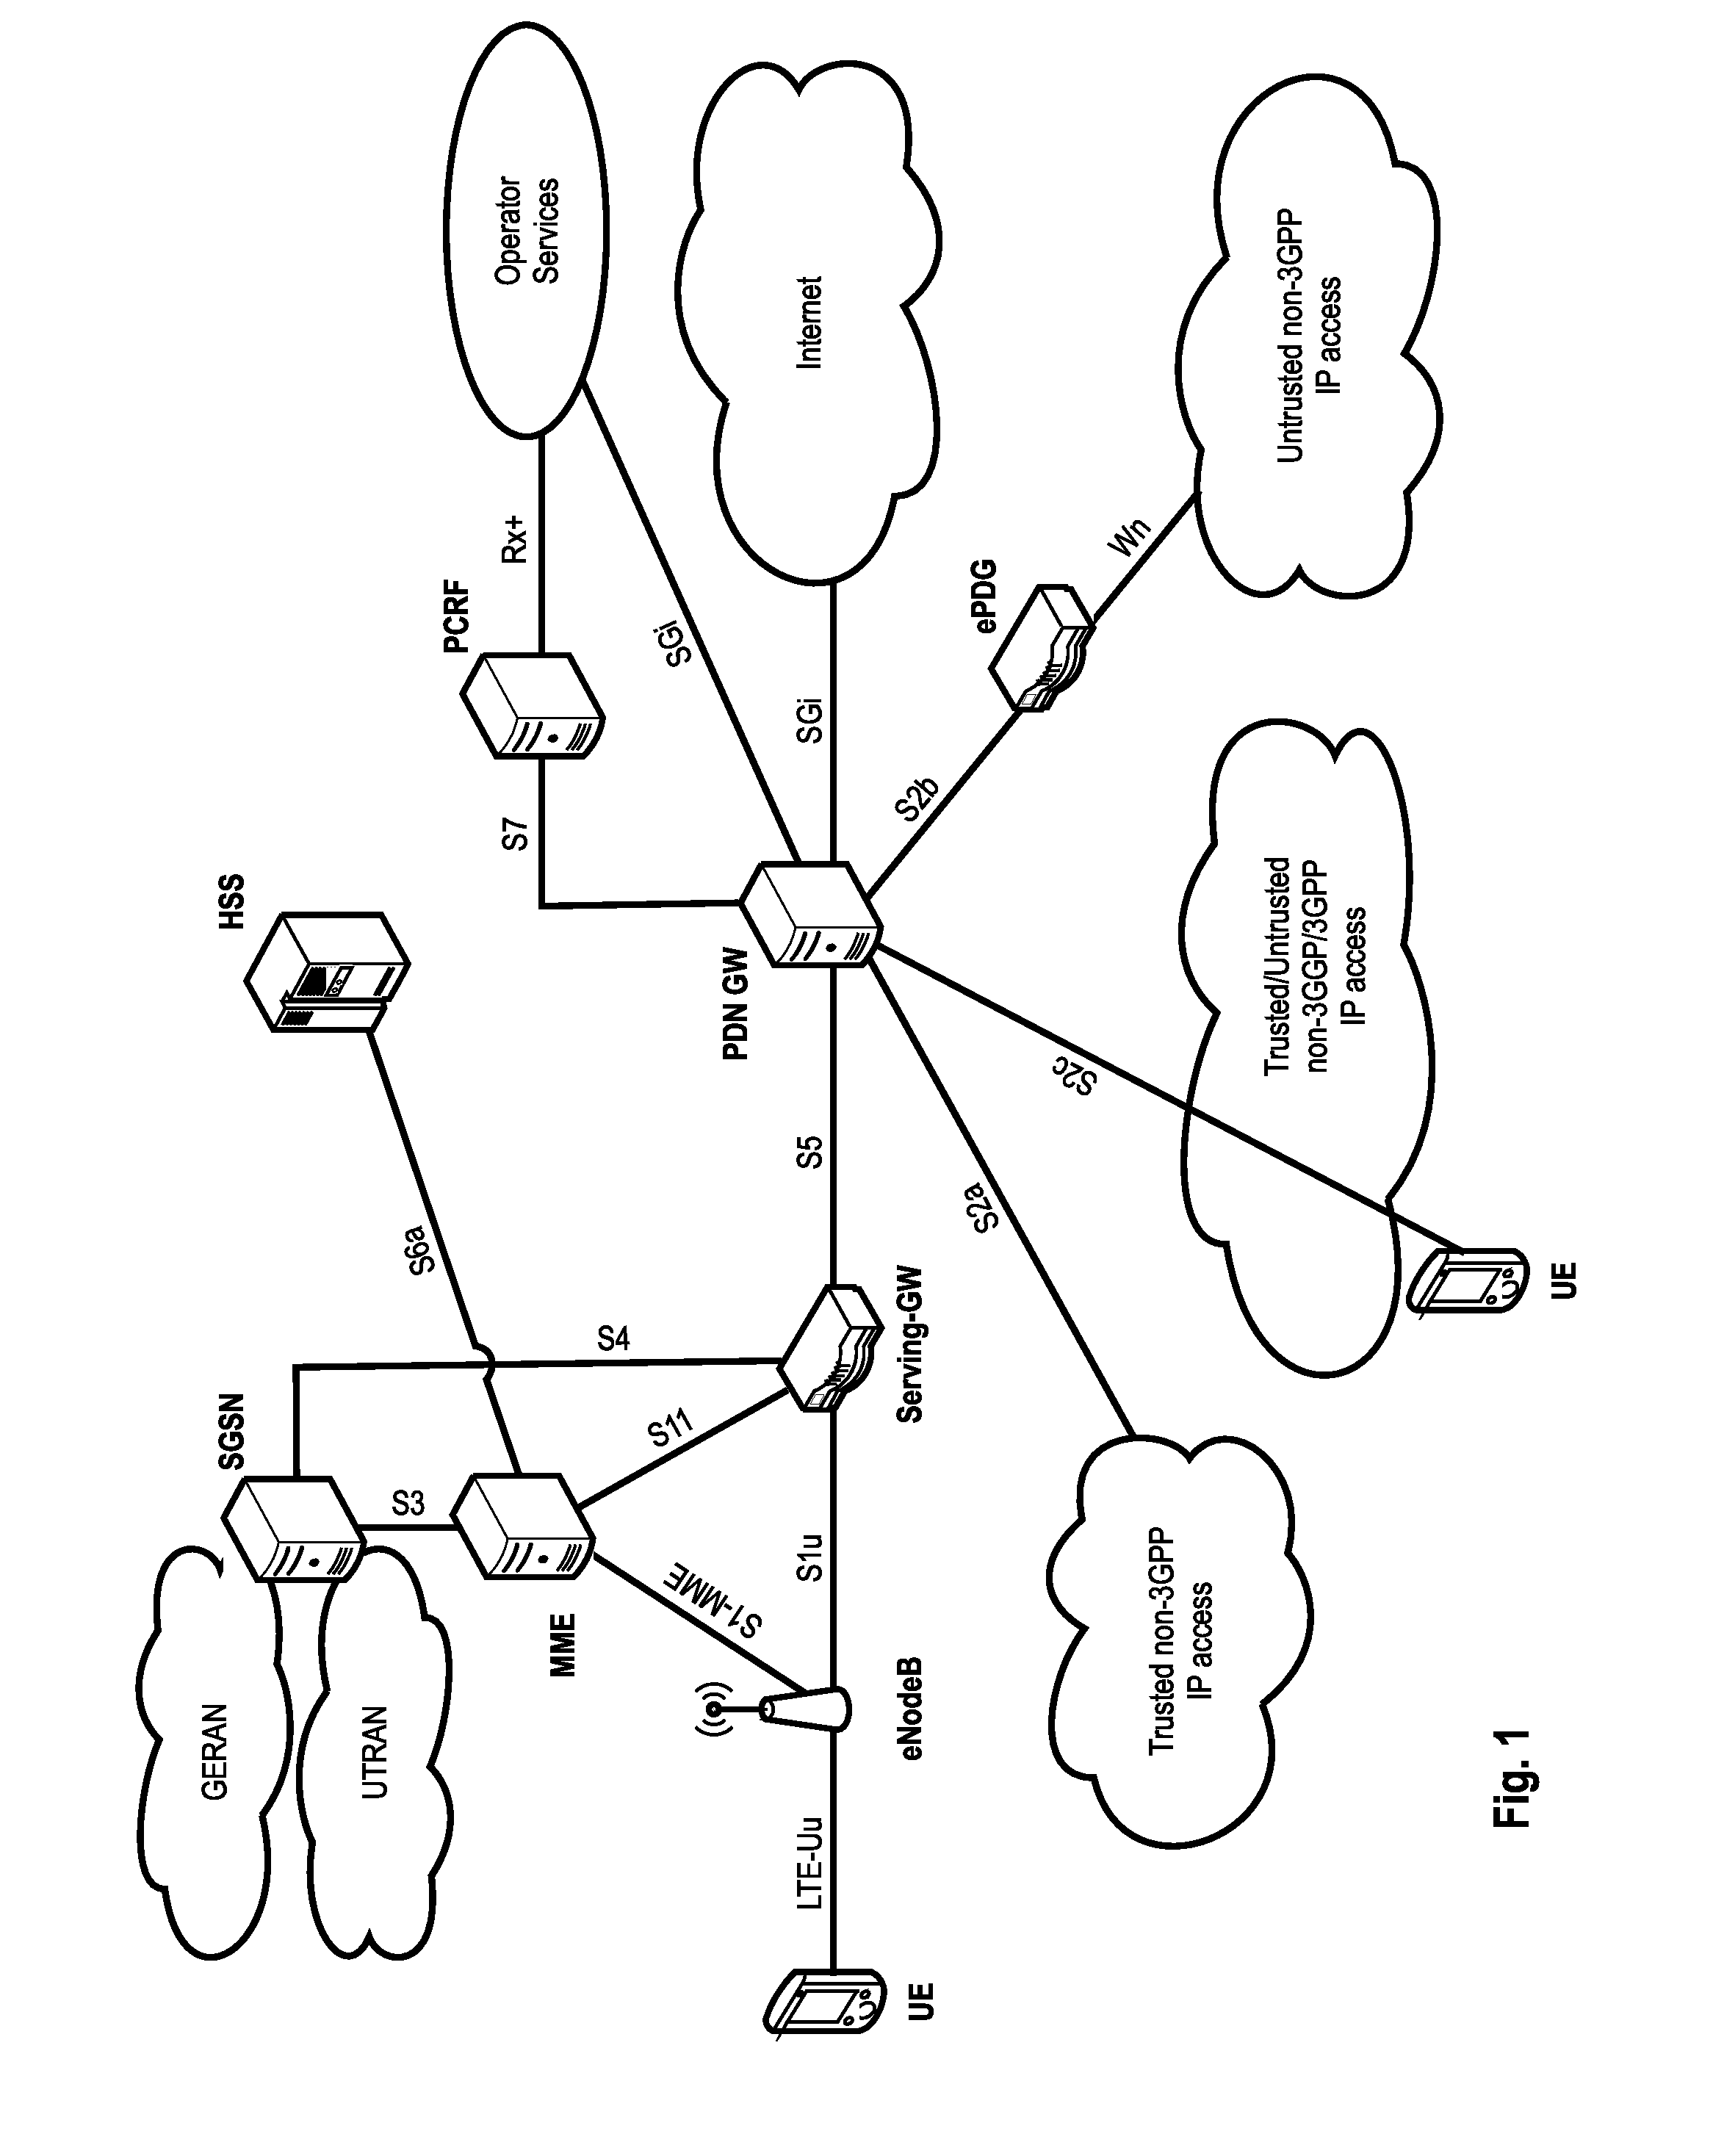 Discontinuous reception operation with additional wake-up opportunities